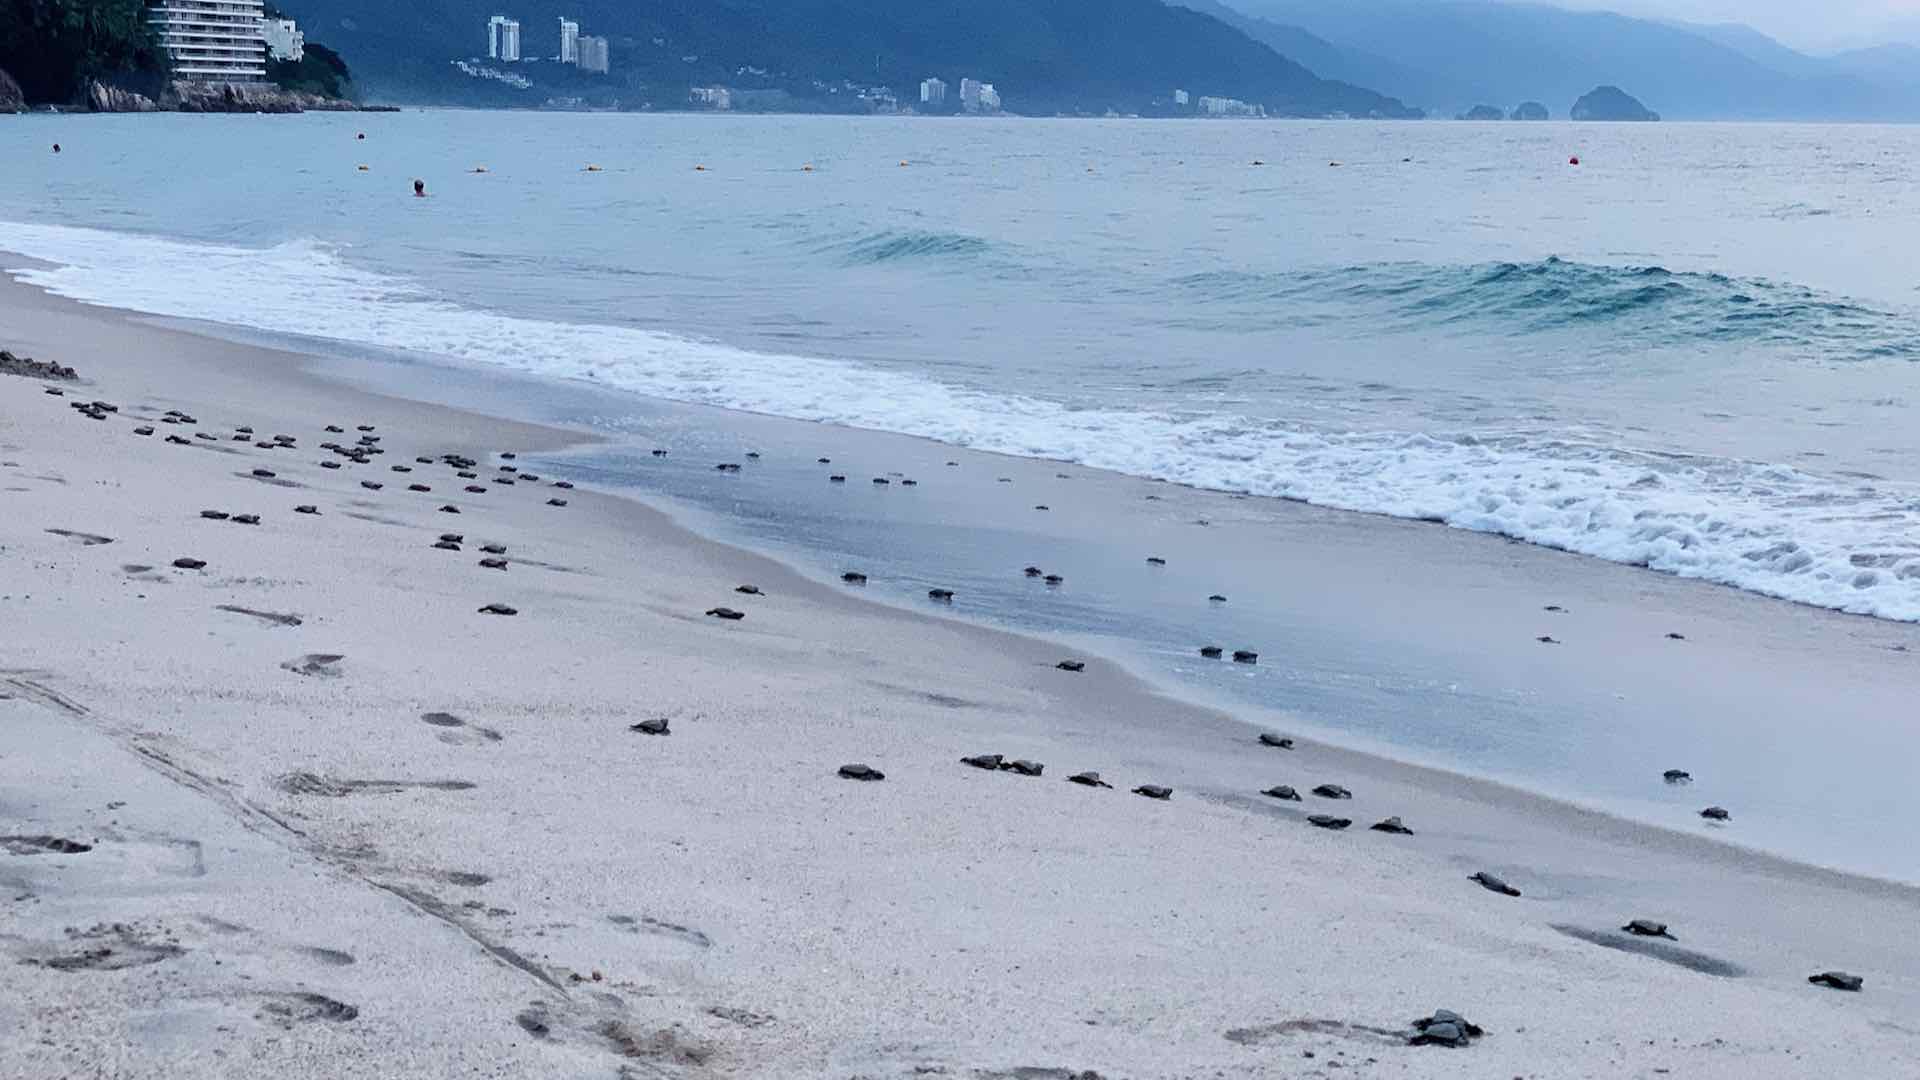 Puerto Vallarta's beaches are also home to incredible biodiversity, including plenty of sea turtles! We had the opportunity to see dozens released.